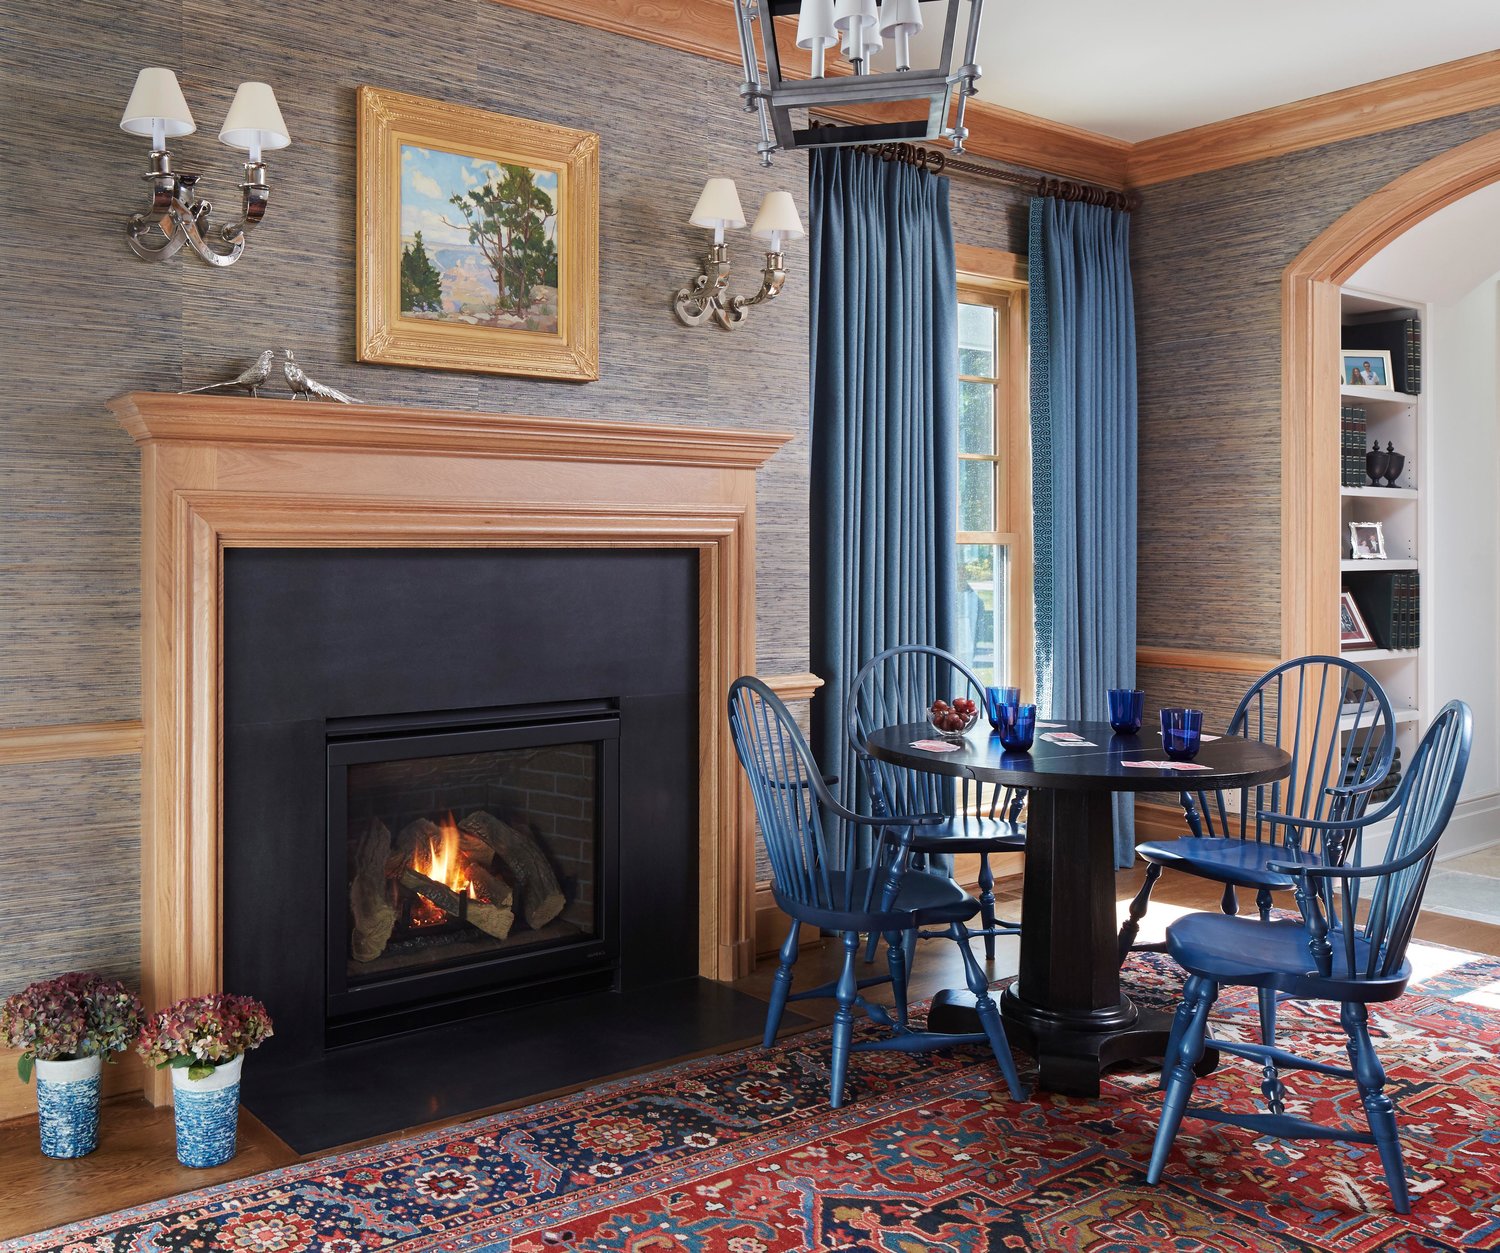 Blue windsor chairs near a cozy fireplace in a family room with grasscloth wall covering. Come see more interior design inspiration from Elizabeth Drake. Photo by Werner Straube. #interiordesign #classicdesign #traditionaldecor #housetour #elizabethdrake